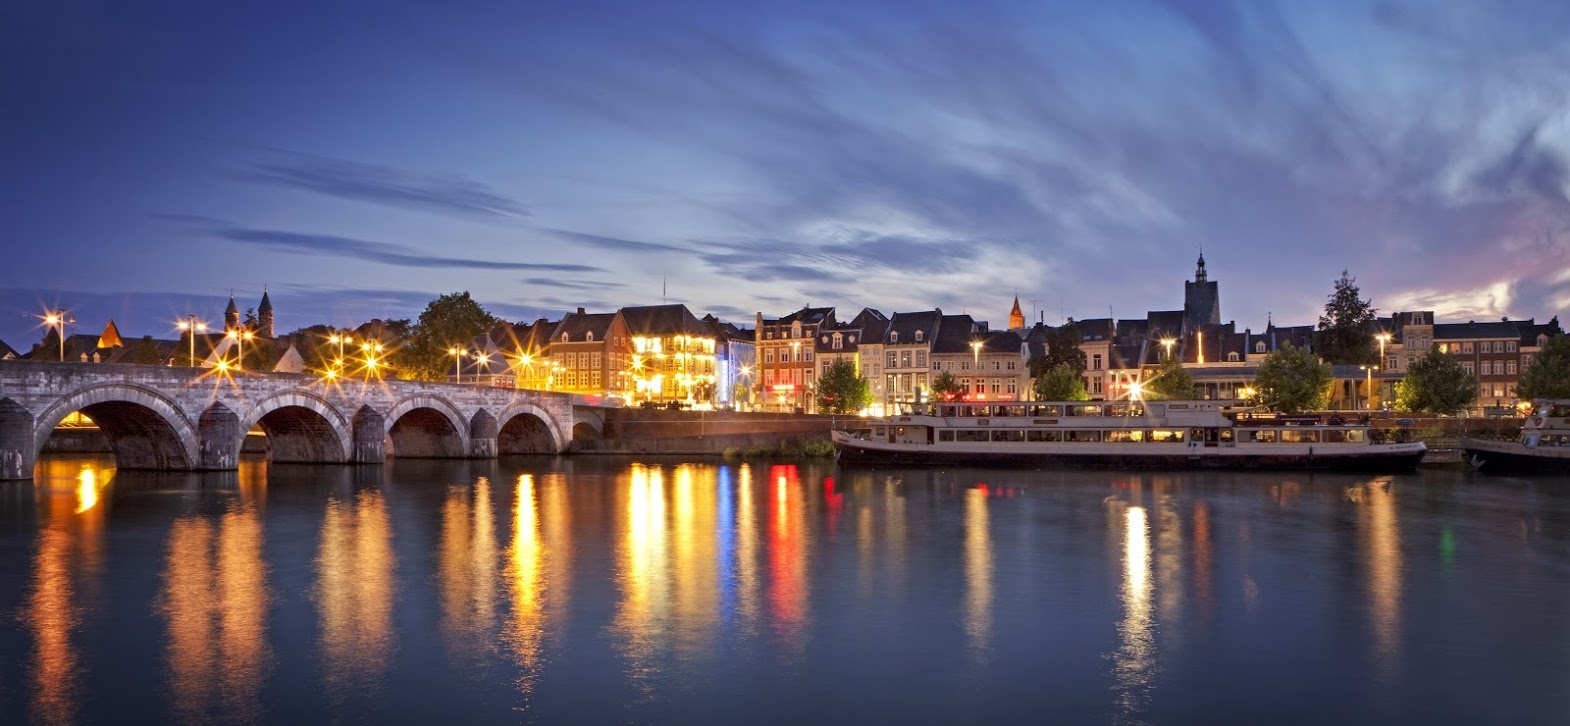  River in Maastricht at twilight